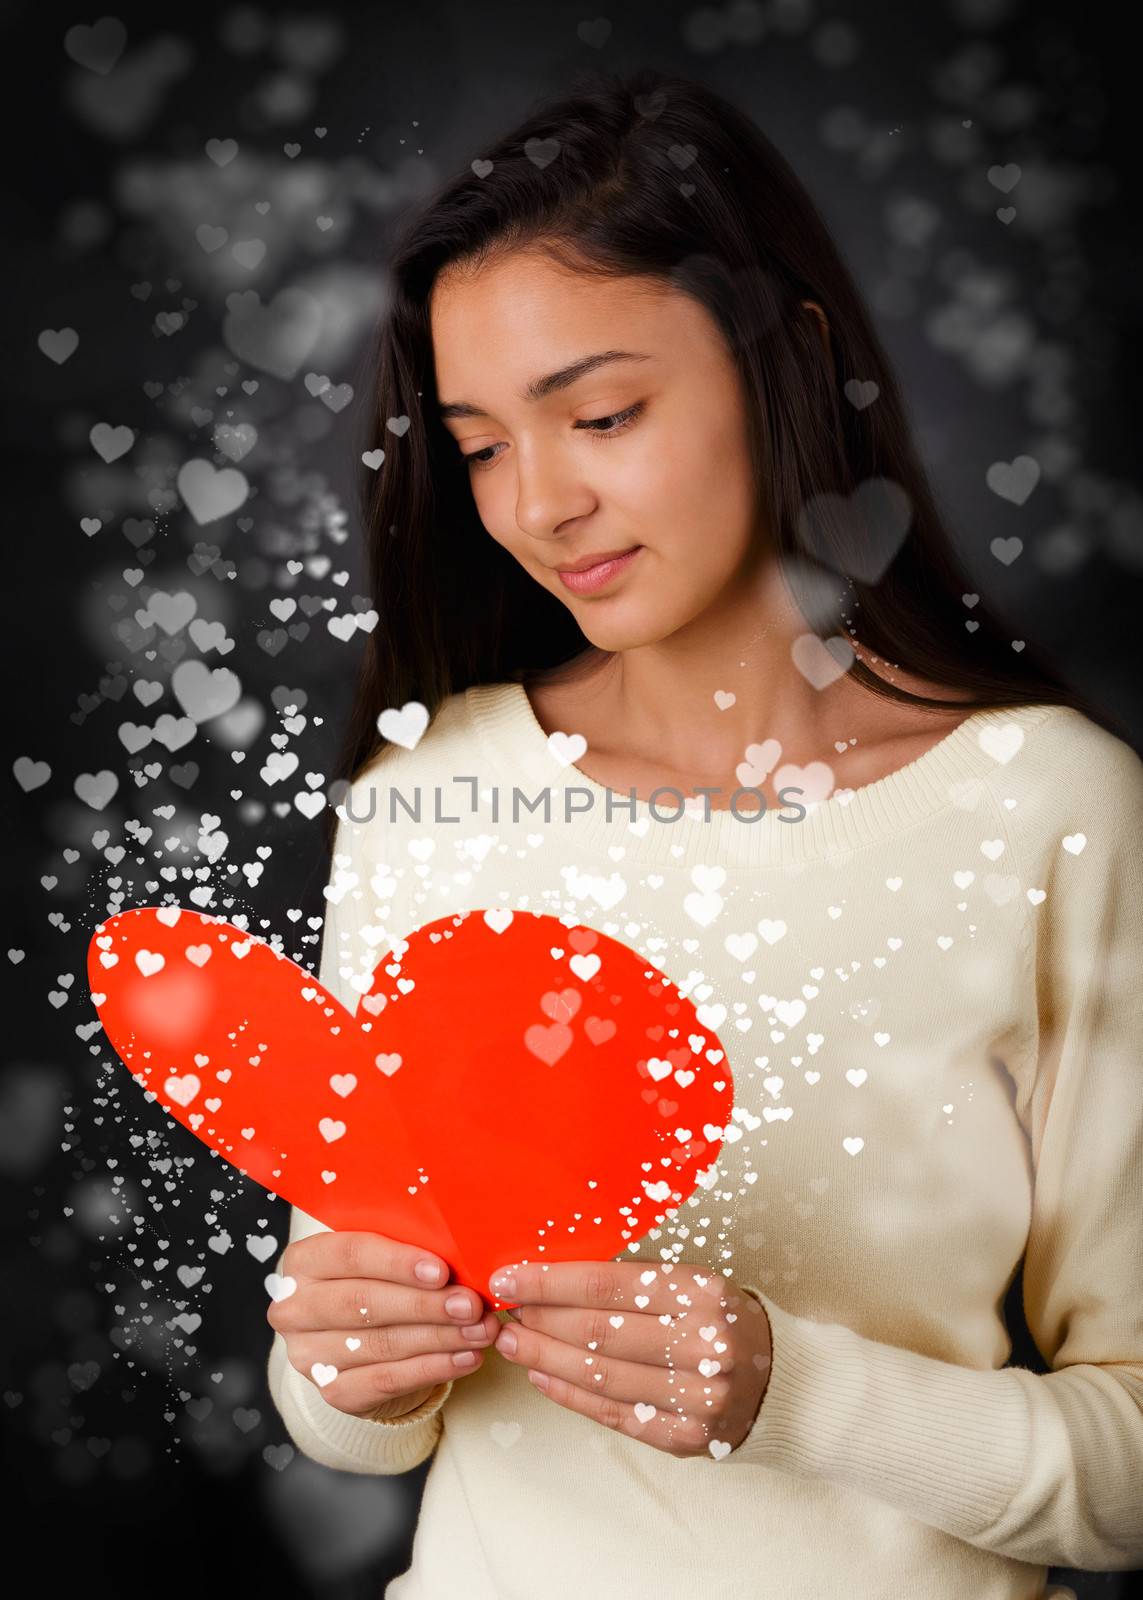 Girl Reading Valentine's Day Card by NicoletaIonescu